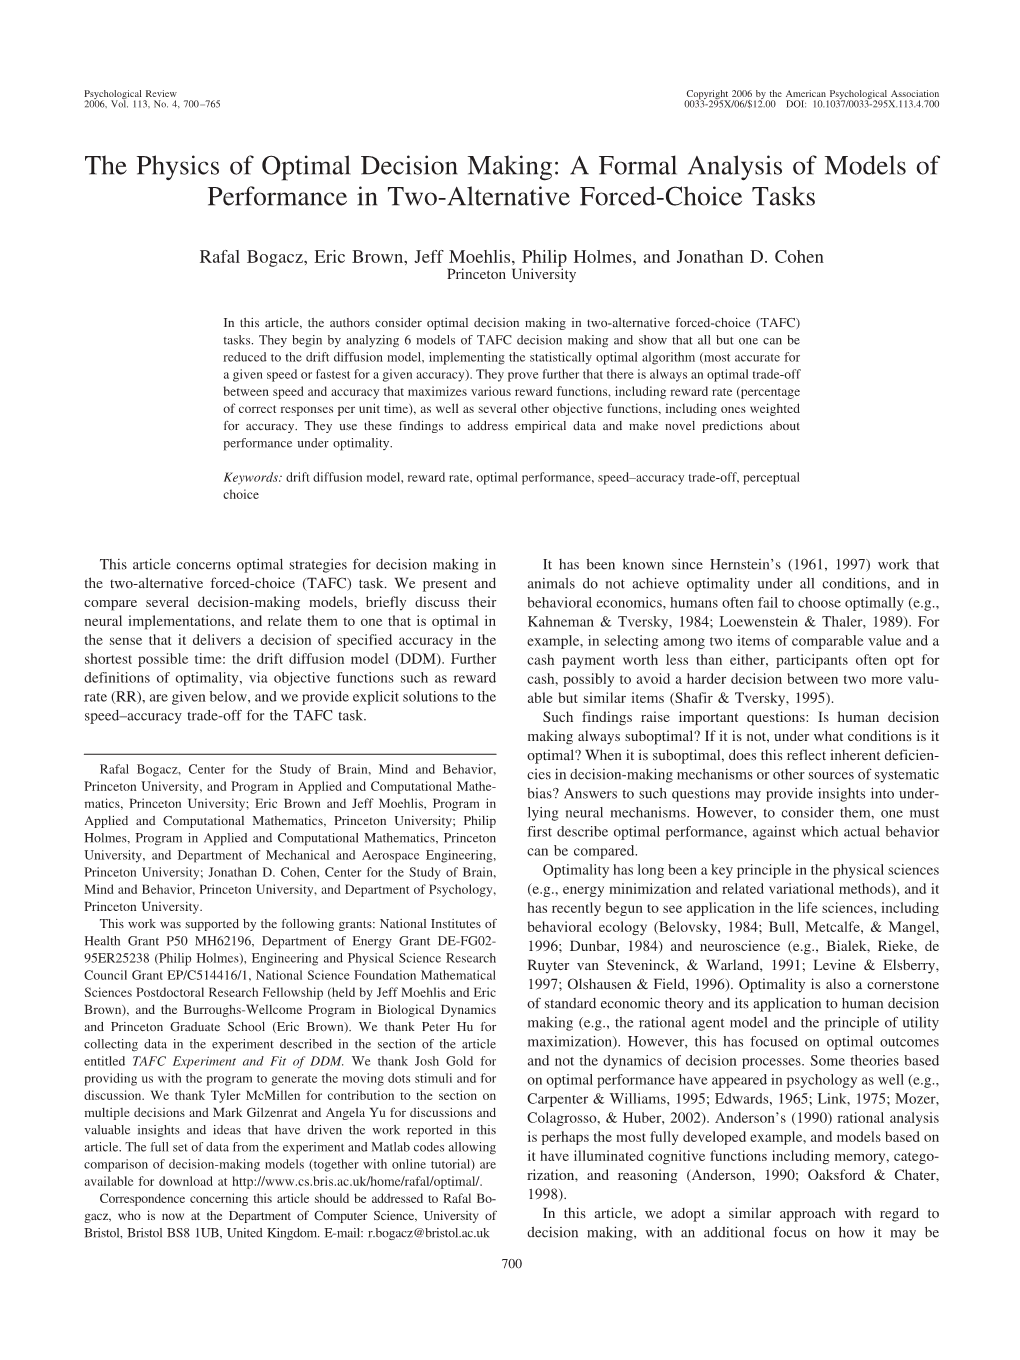 The Physics of Optimal Decision Making: a Formal Analysis of Models of Performance in Two-Alternative Forced-Choice Tasks